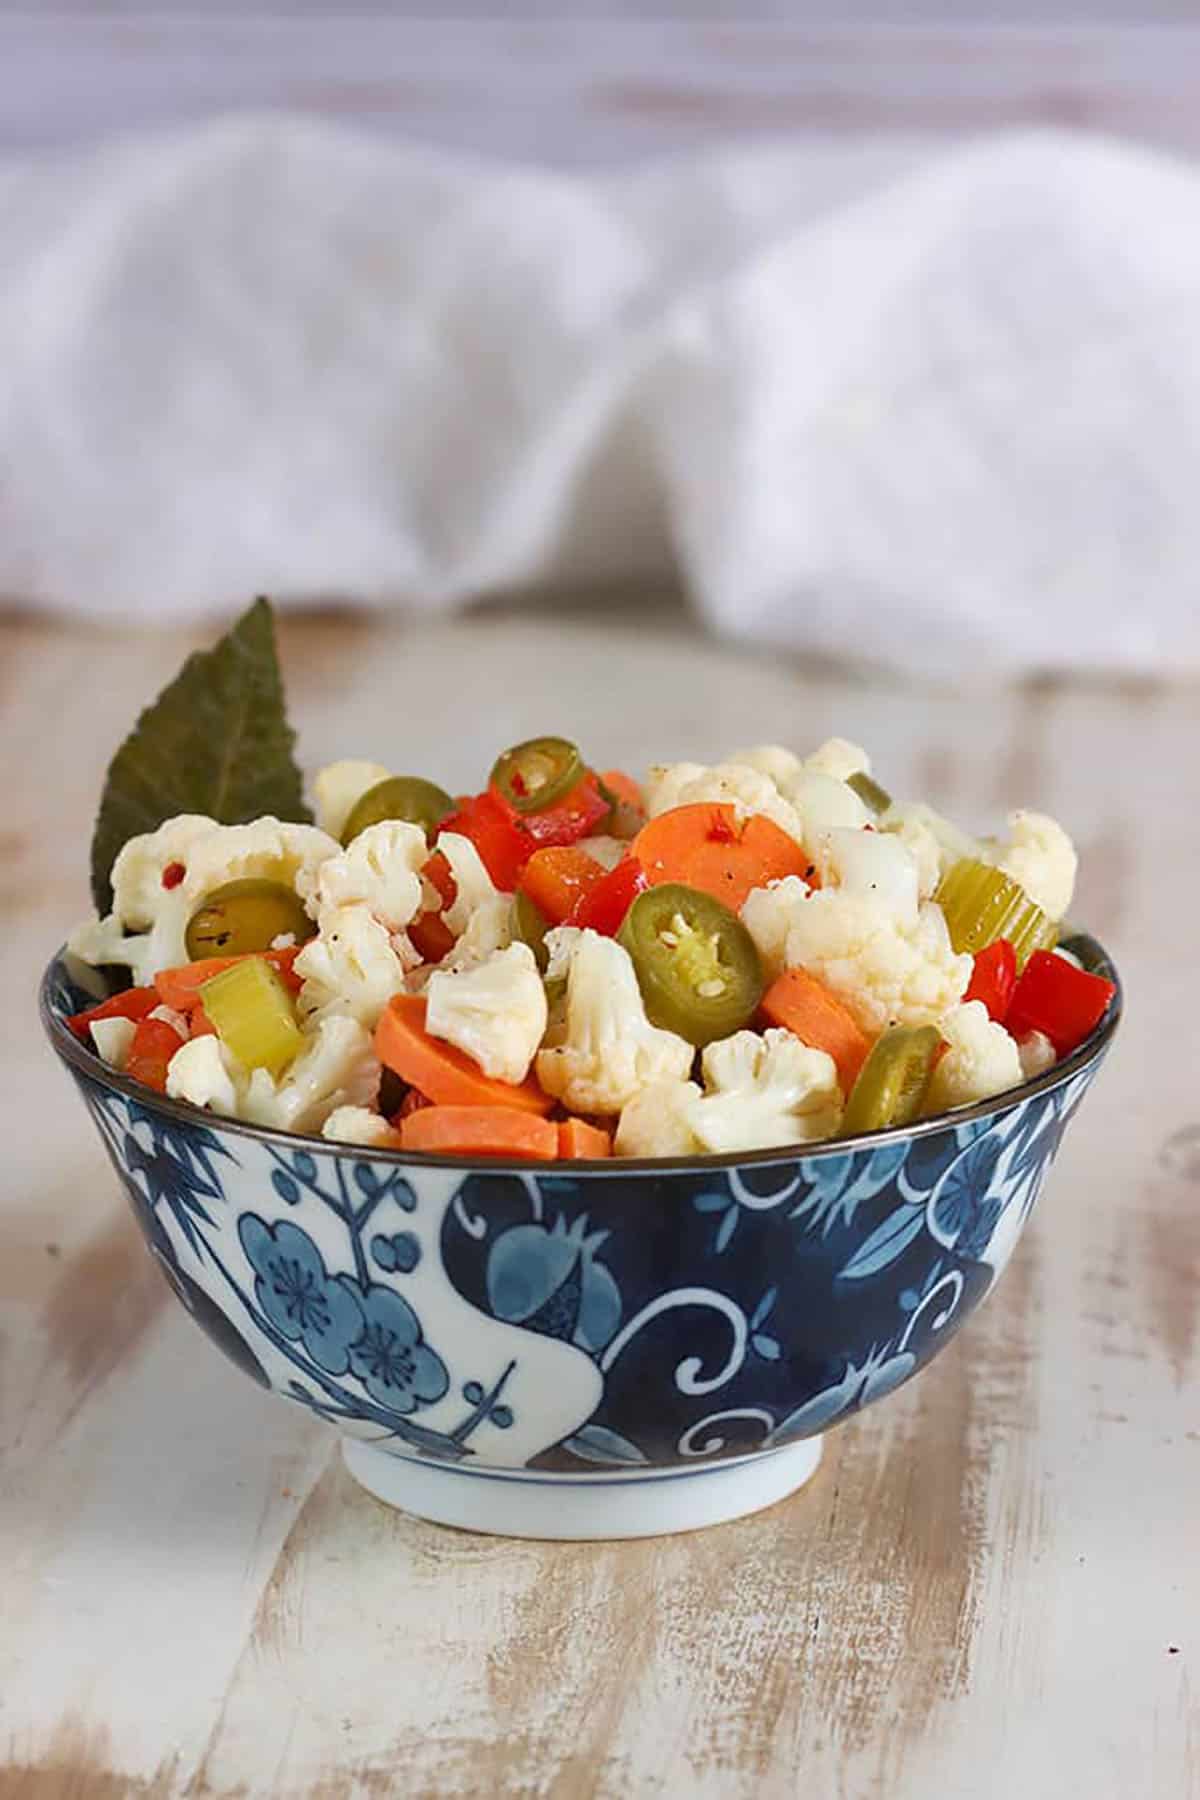 Giardiniera in a blue and white floral bowl with a white napkin in the background.